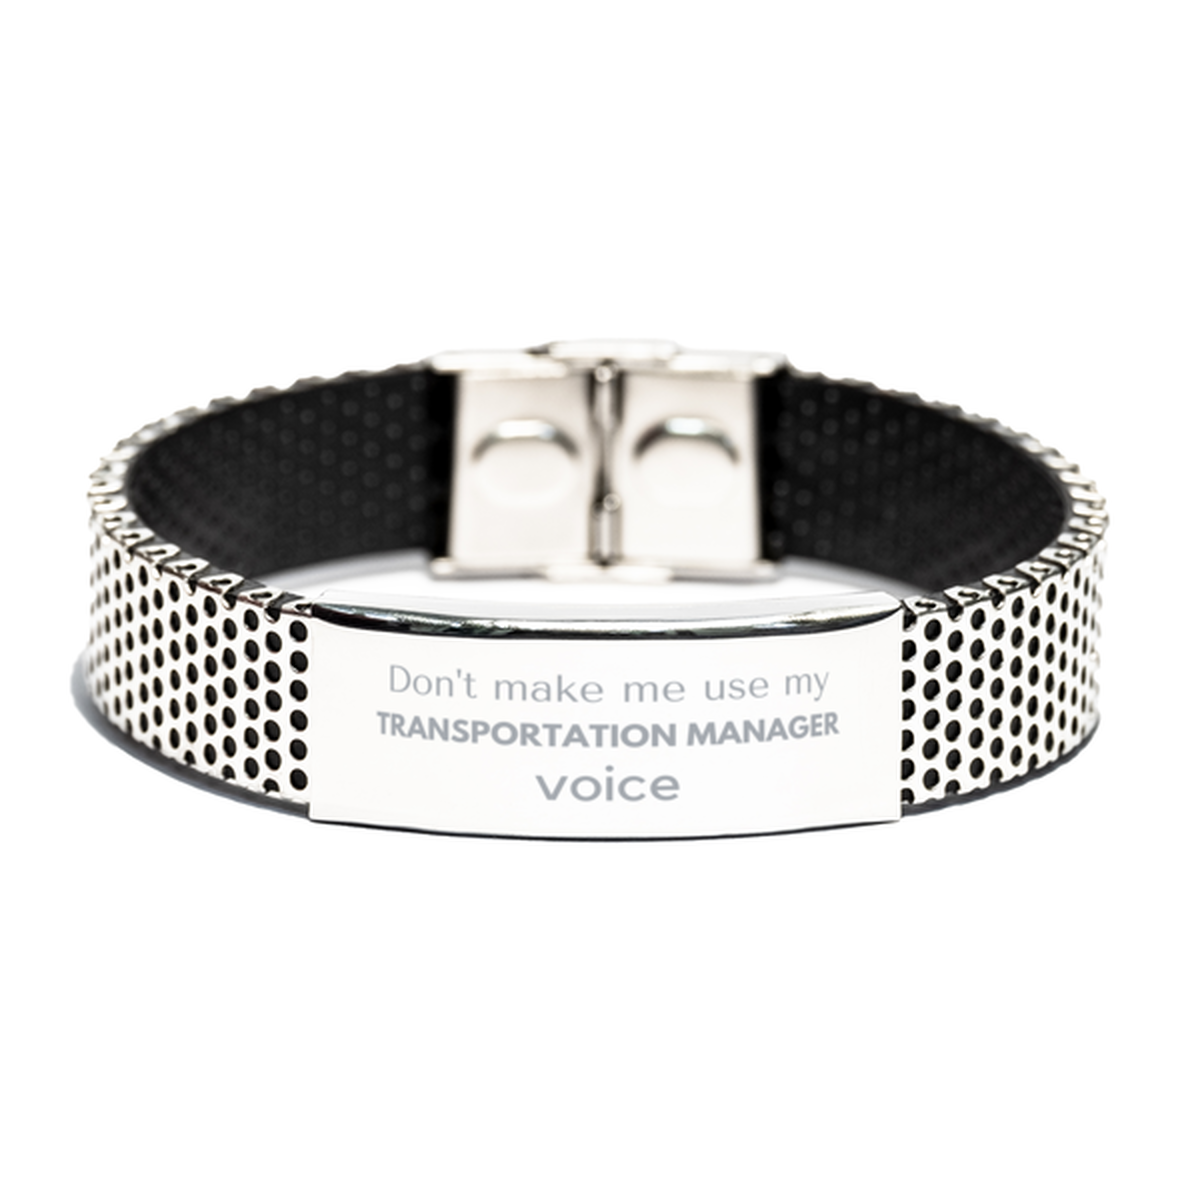 Don't make me use my Transportation Manager voice, Sarcasm Transportation Manager Gifts, Christmas Transportation Manager Stainless Steel Bracelet Birthday Unique Gifts For Transportation Manager Coworkers, Men, Women, Colleague, Friends